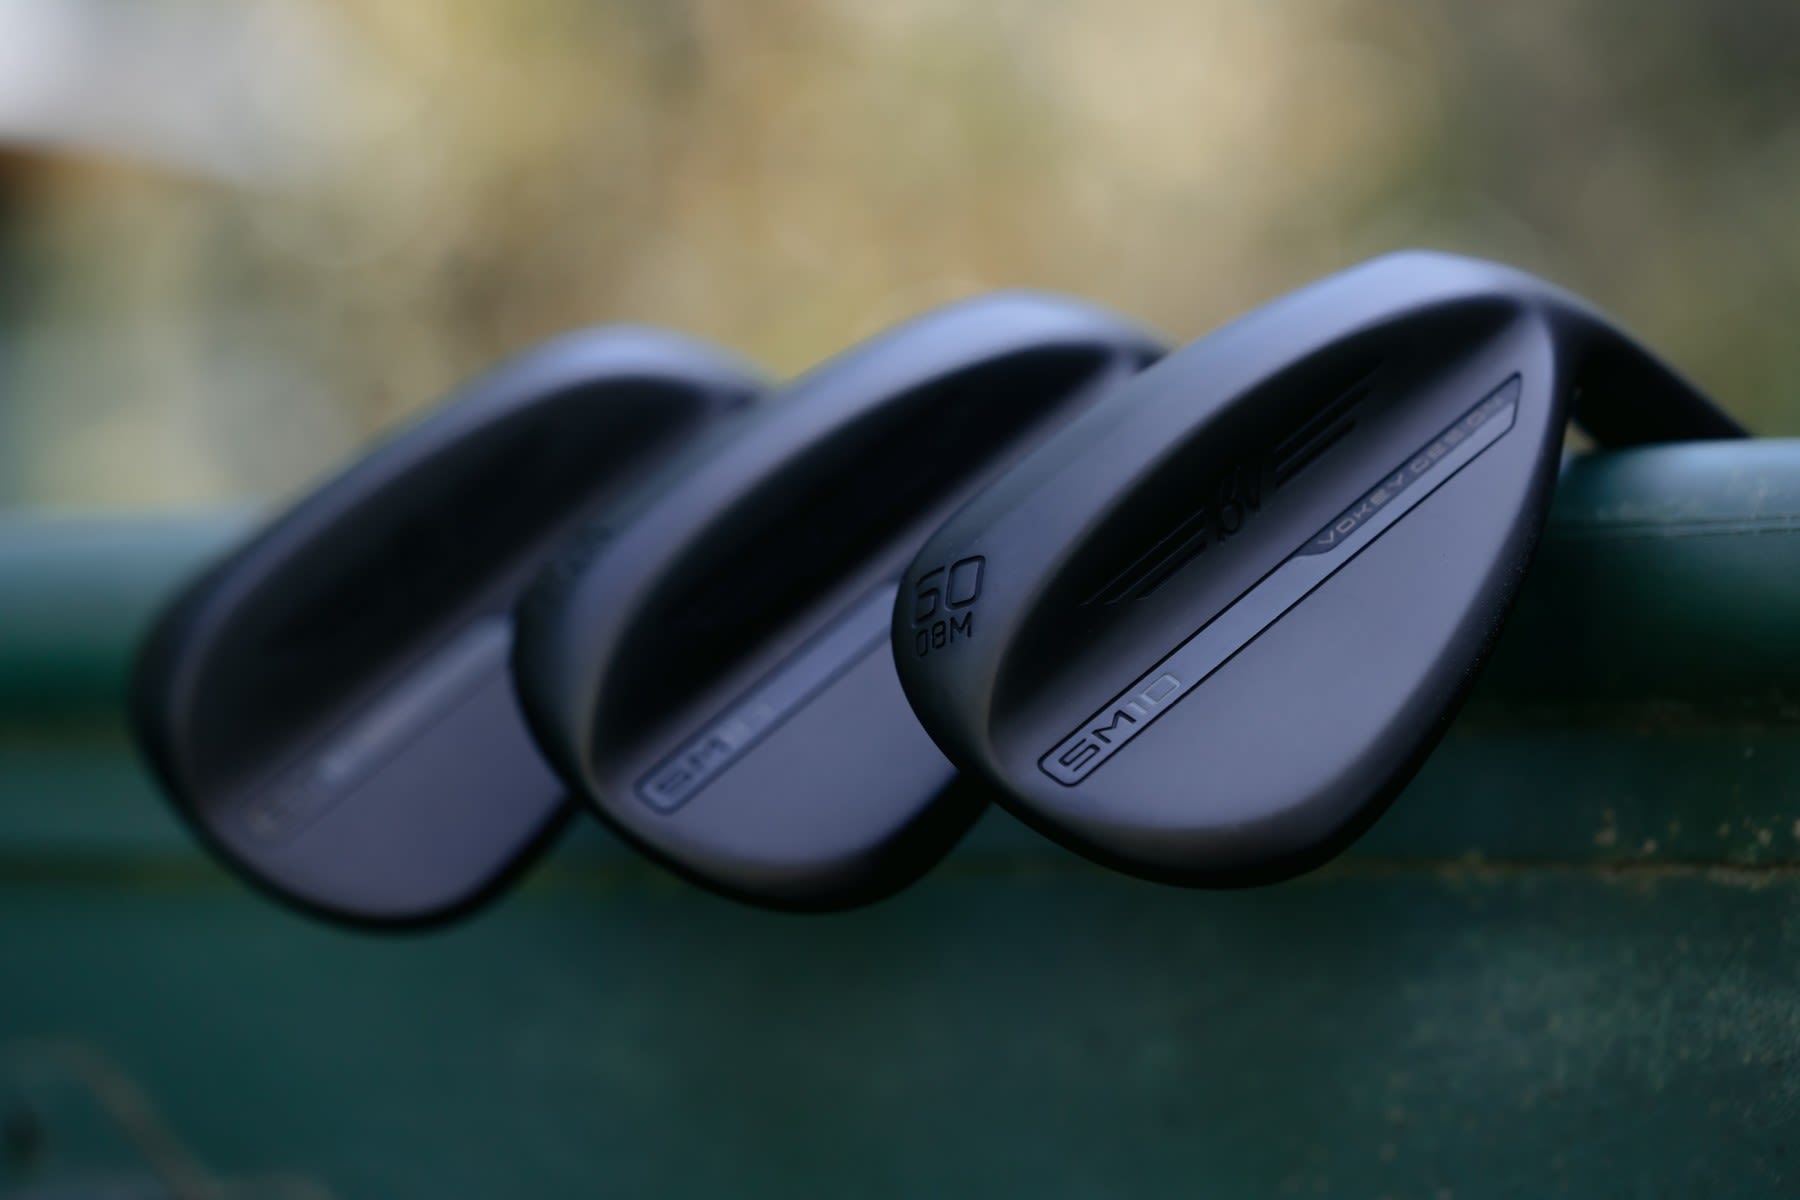 A jet-black version of the new SM10 wedges.